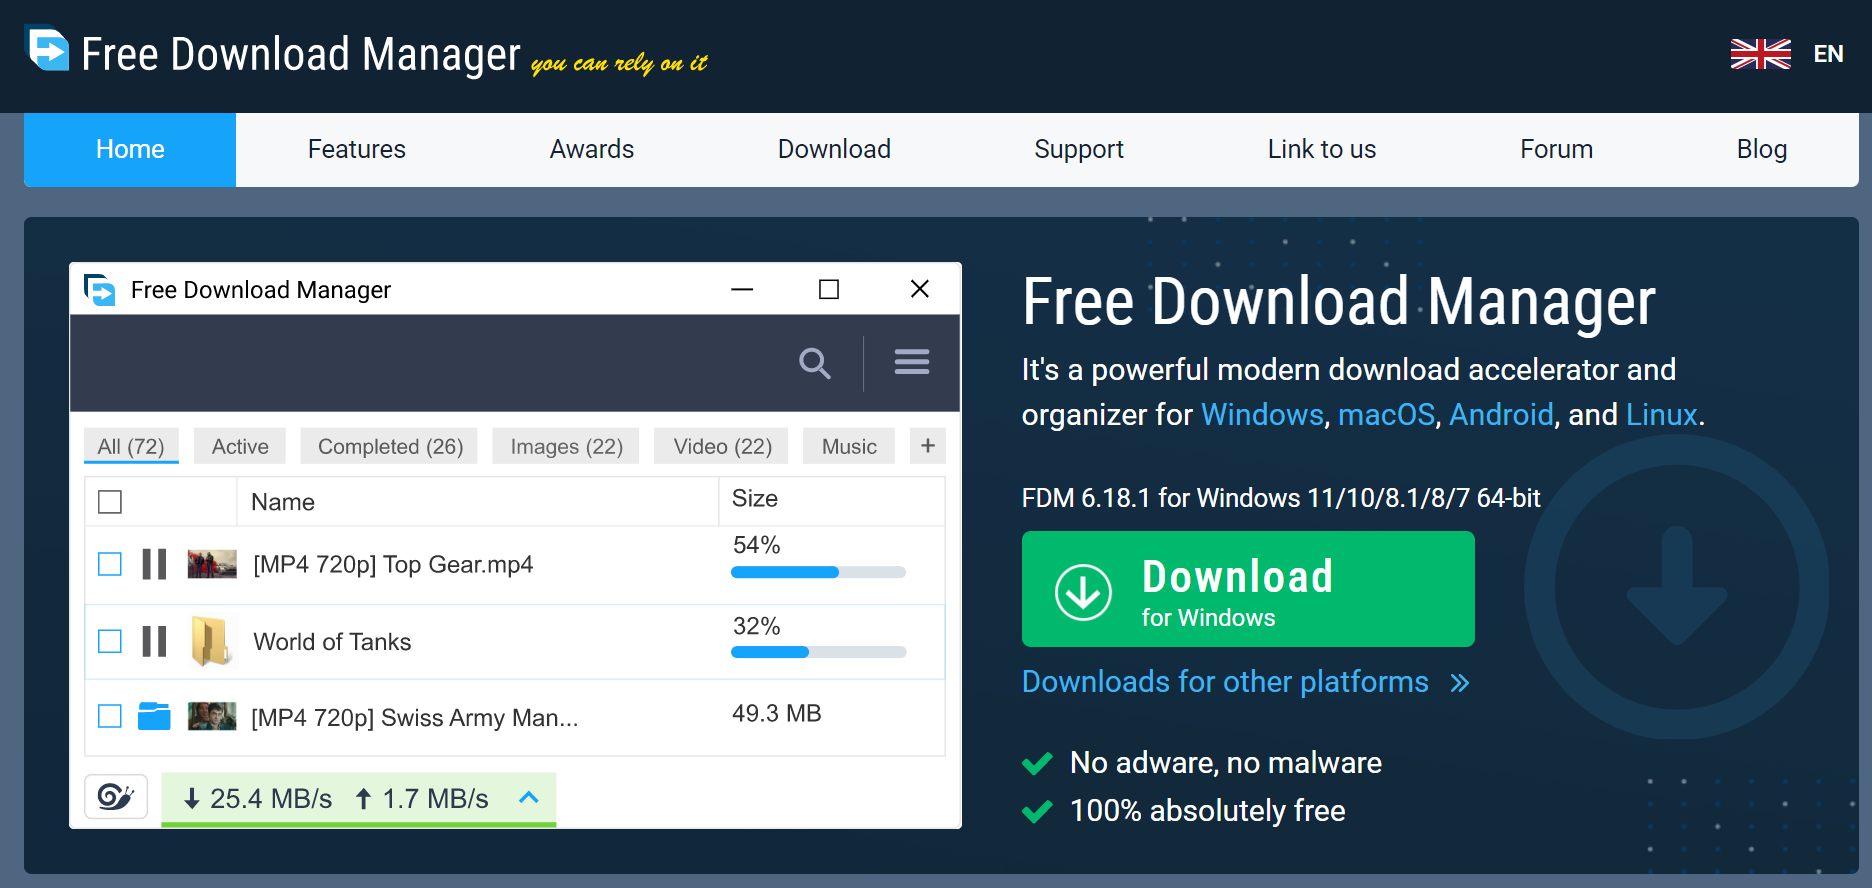 Free Download Manager: